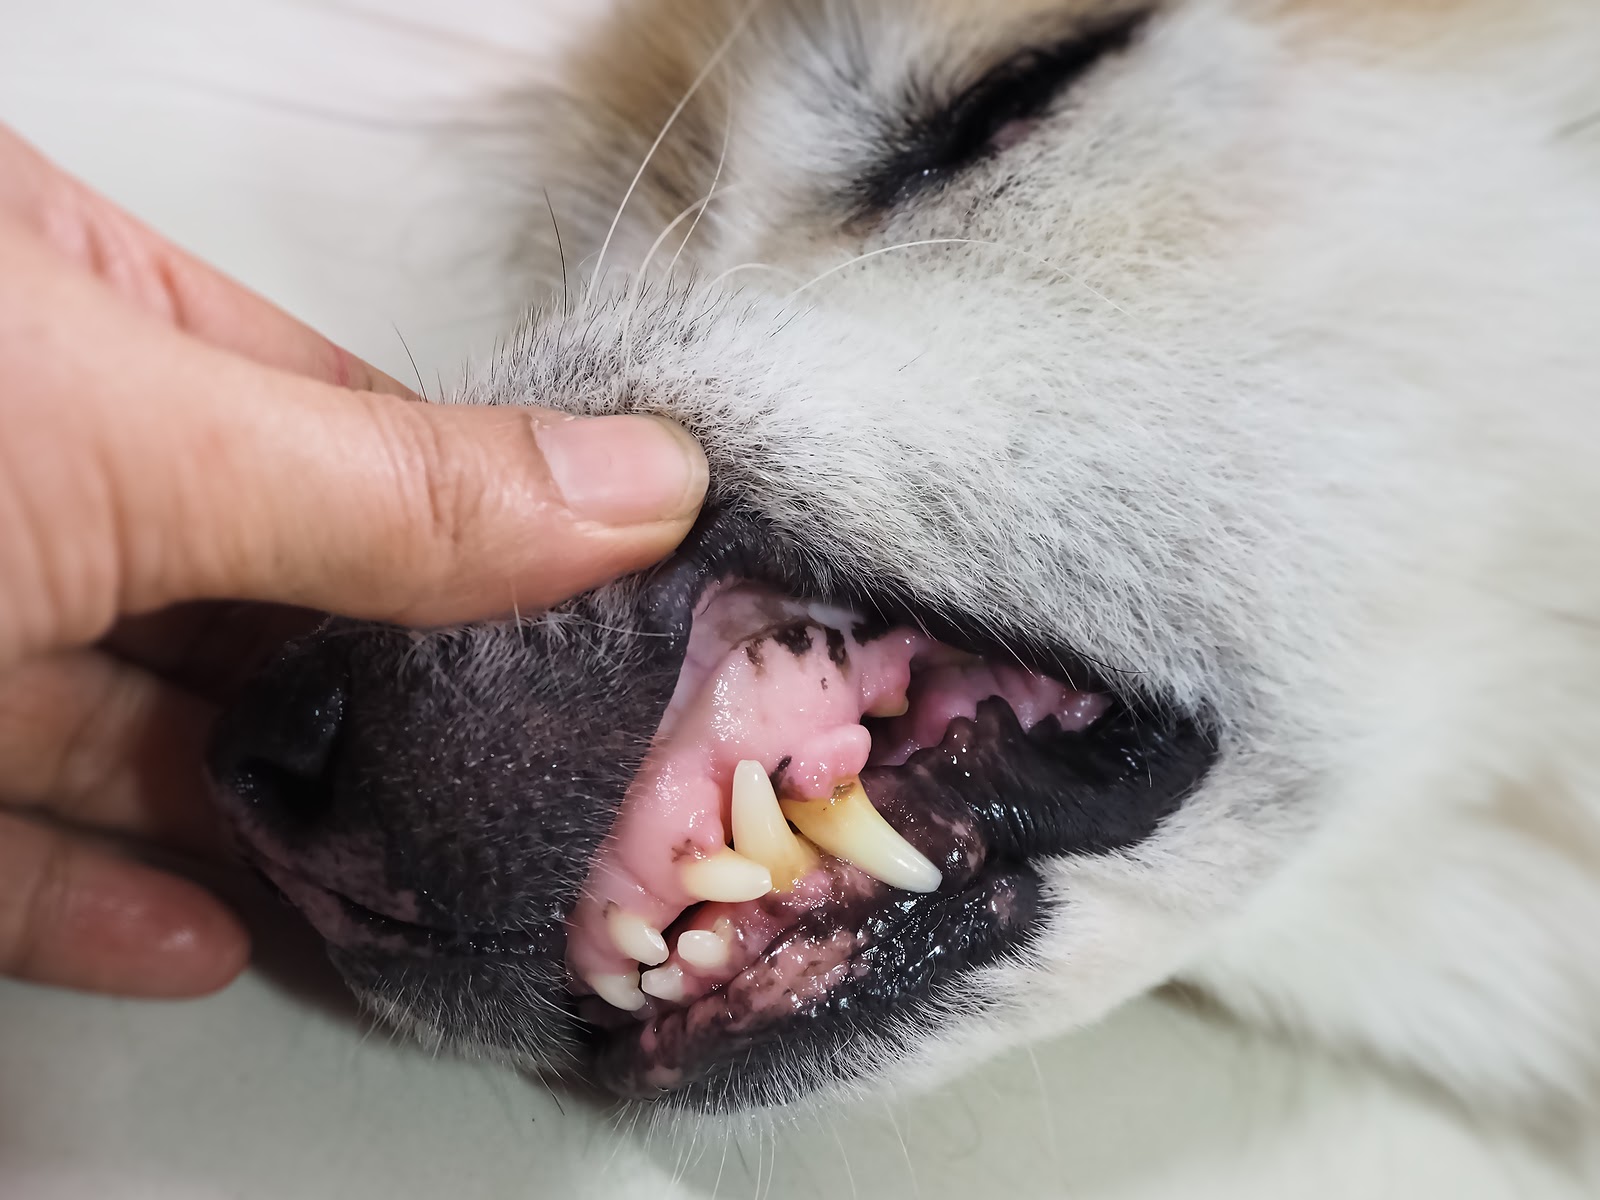 Dental Scaling For Dogs Cats Costs About Sgd 300 Why Won T You Brush Your Pet S Teeth Silversky Delivering Wow To Everything Pets